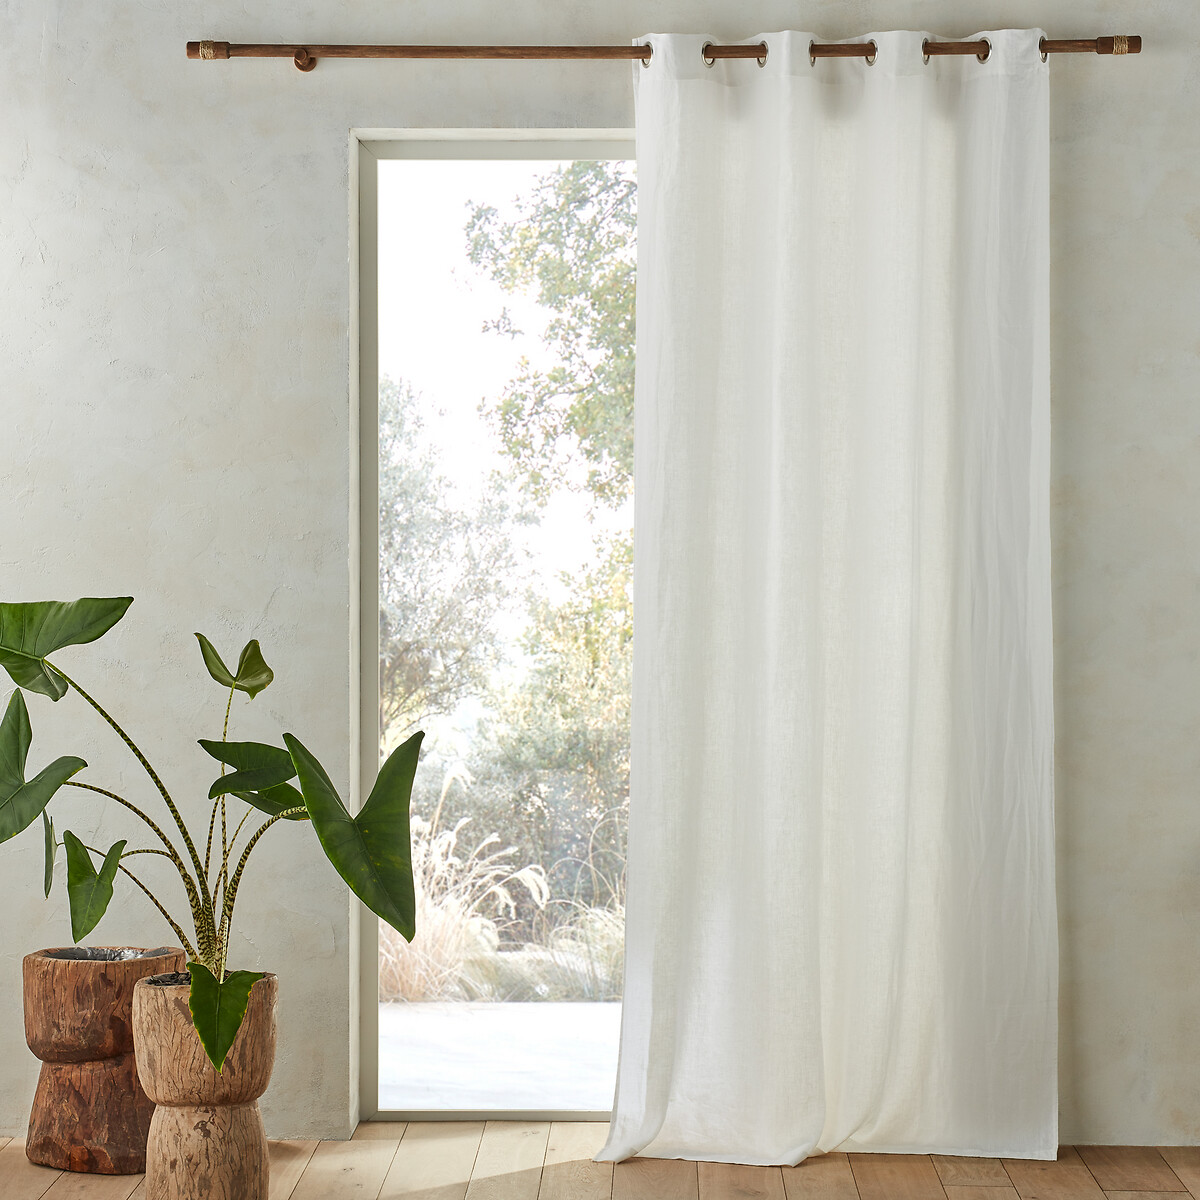 Sienna Linen Look Voile Eyelet Ring Top Curtain Panel Available Different Sizes 